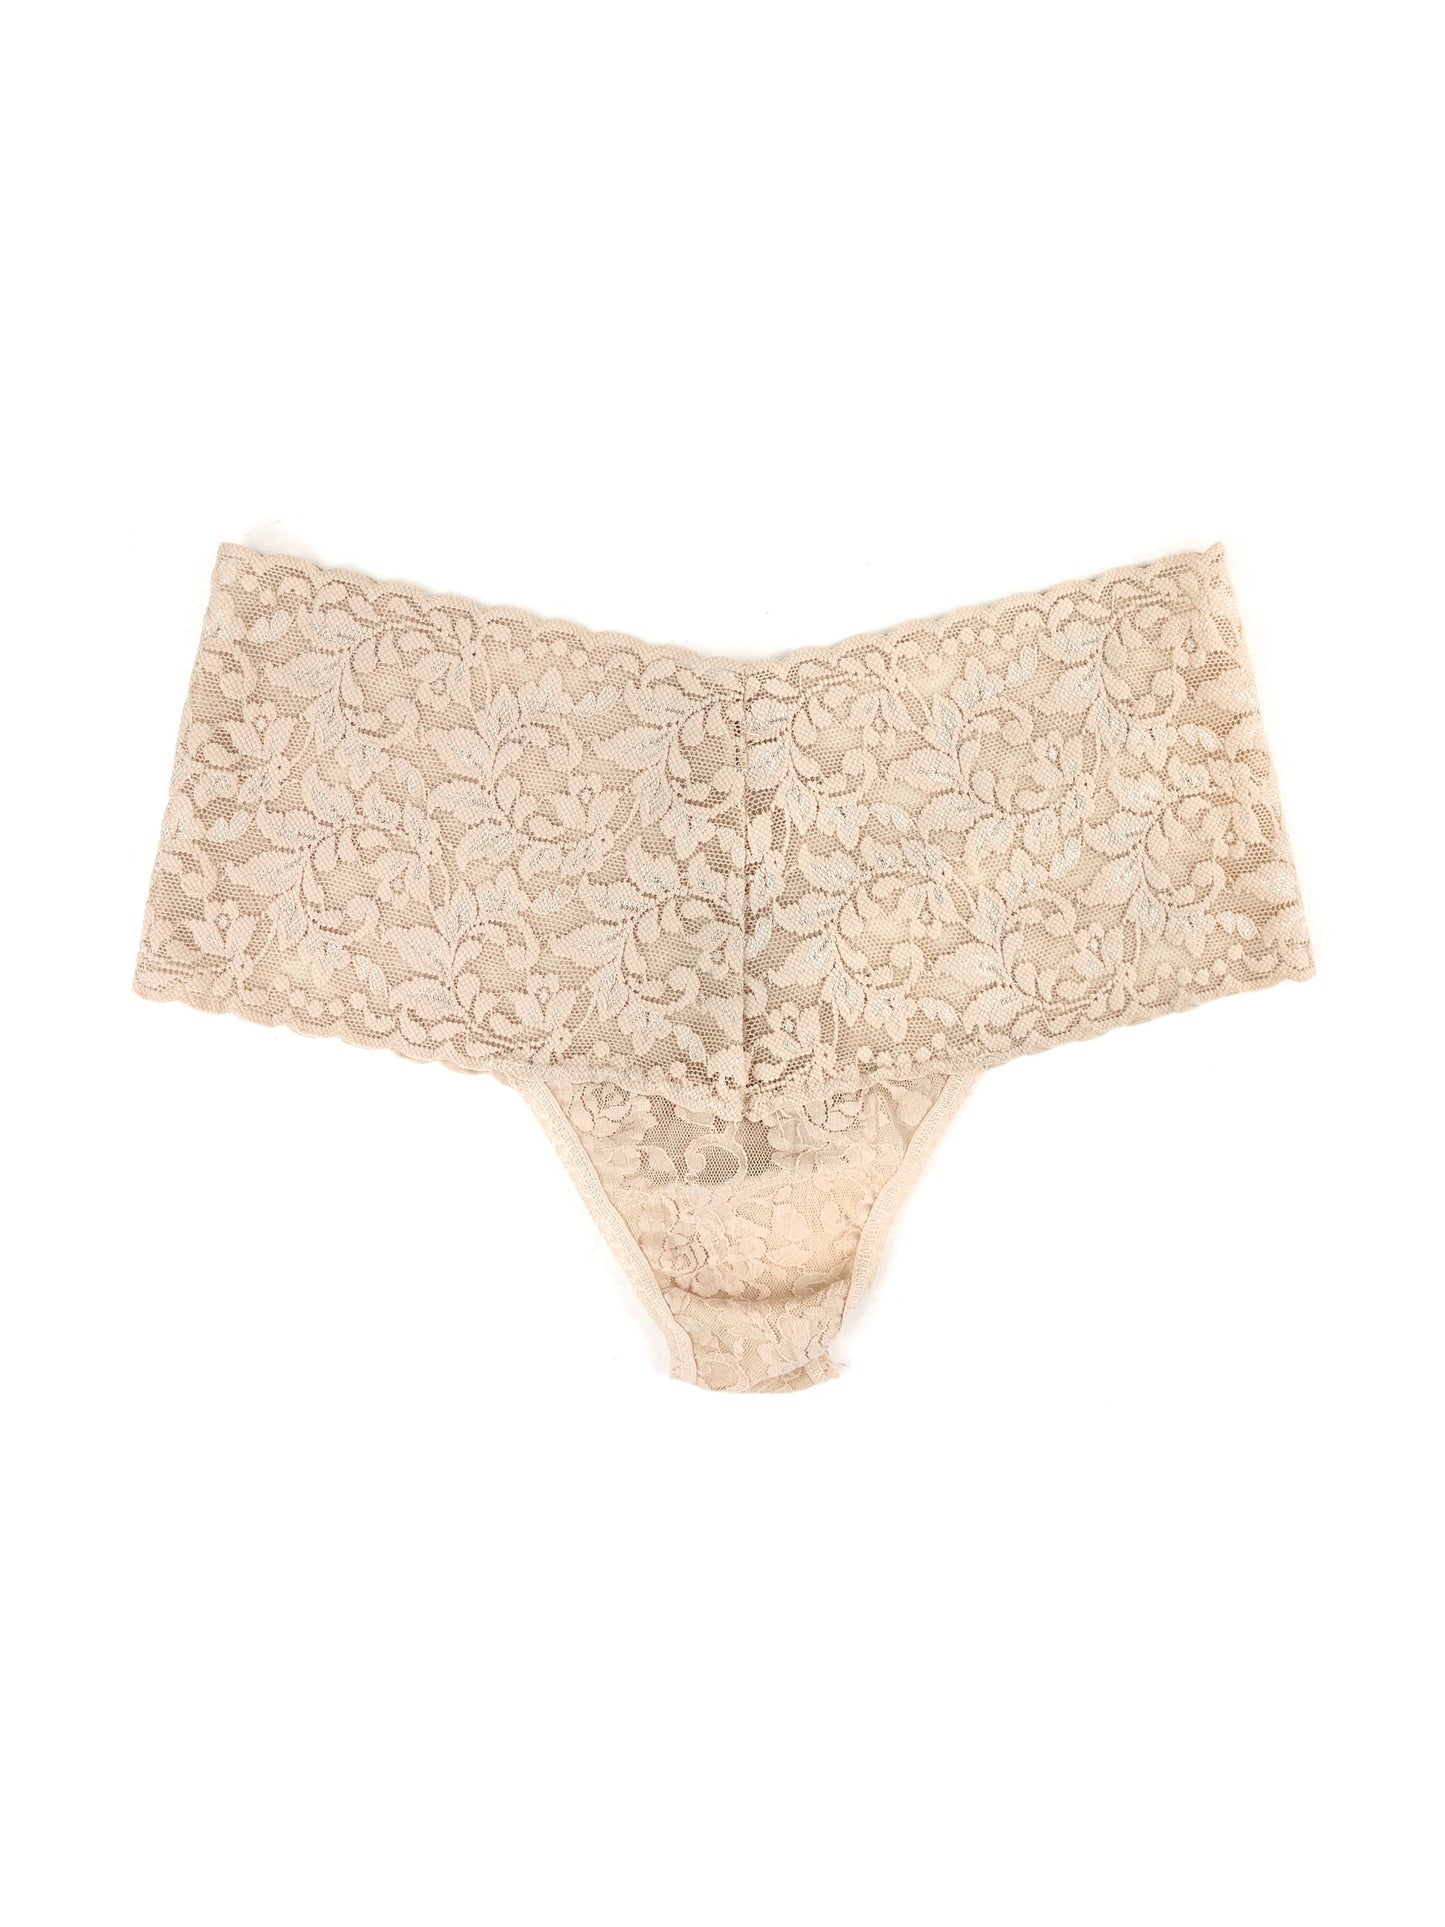 Hanky Panky Retro Thong in Chai in front view product image